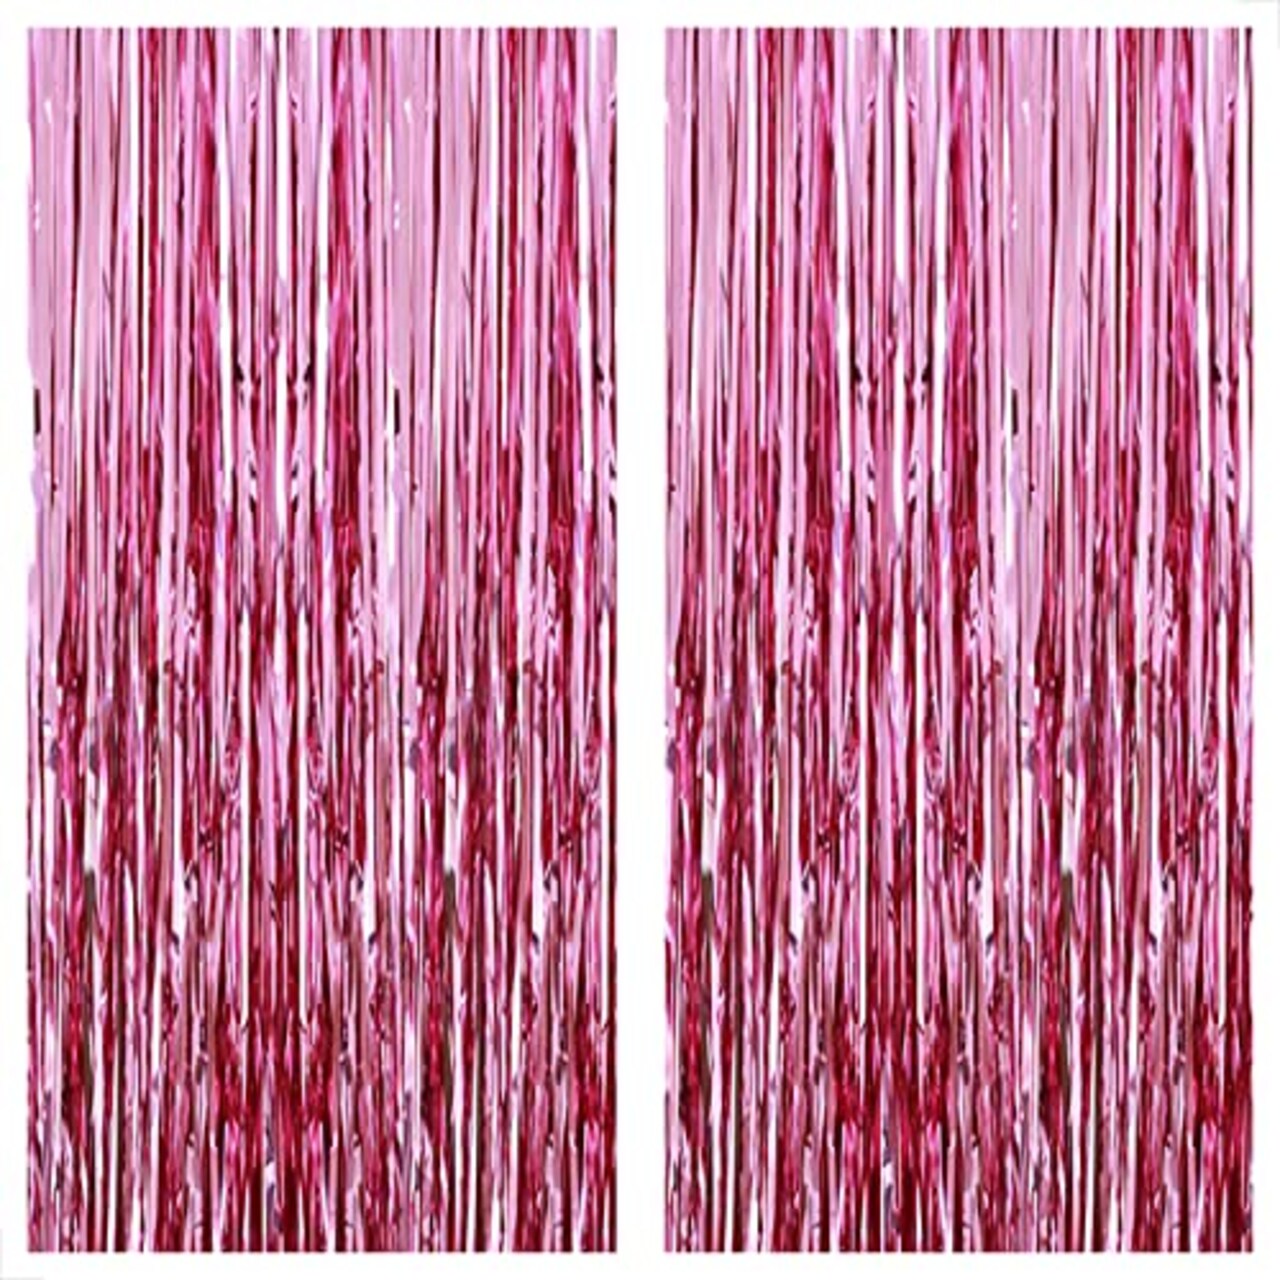 KatchOn, Pink Backdrop for Pink Party Decorations - XtraLarge 6.4x8 Feet,  Pack of 2, Pink Foil Fringe Curtain, Pink Fringe Backdrop for Pink  Streamers Party Decorations, Pink Birthday Decorations